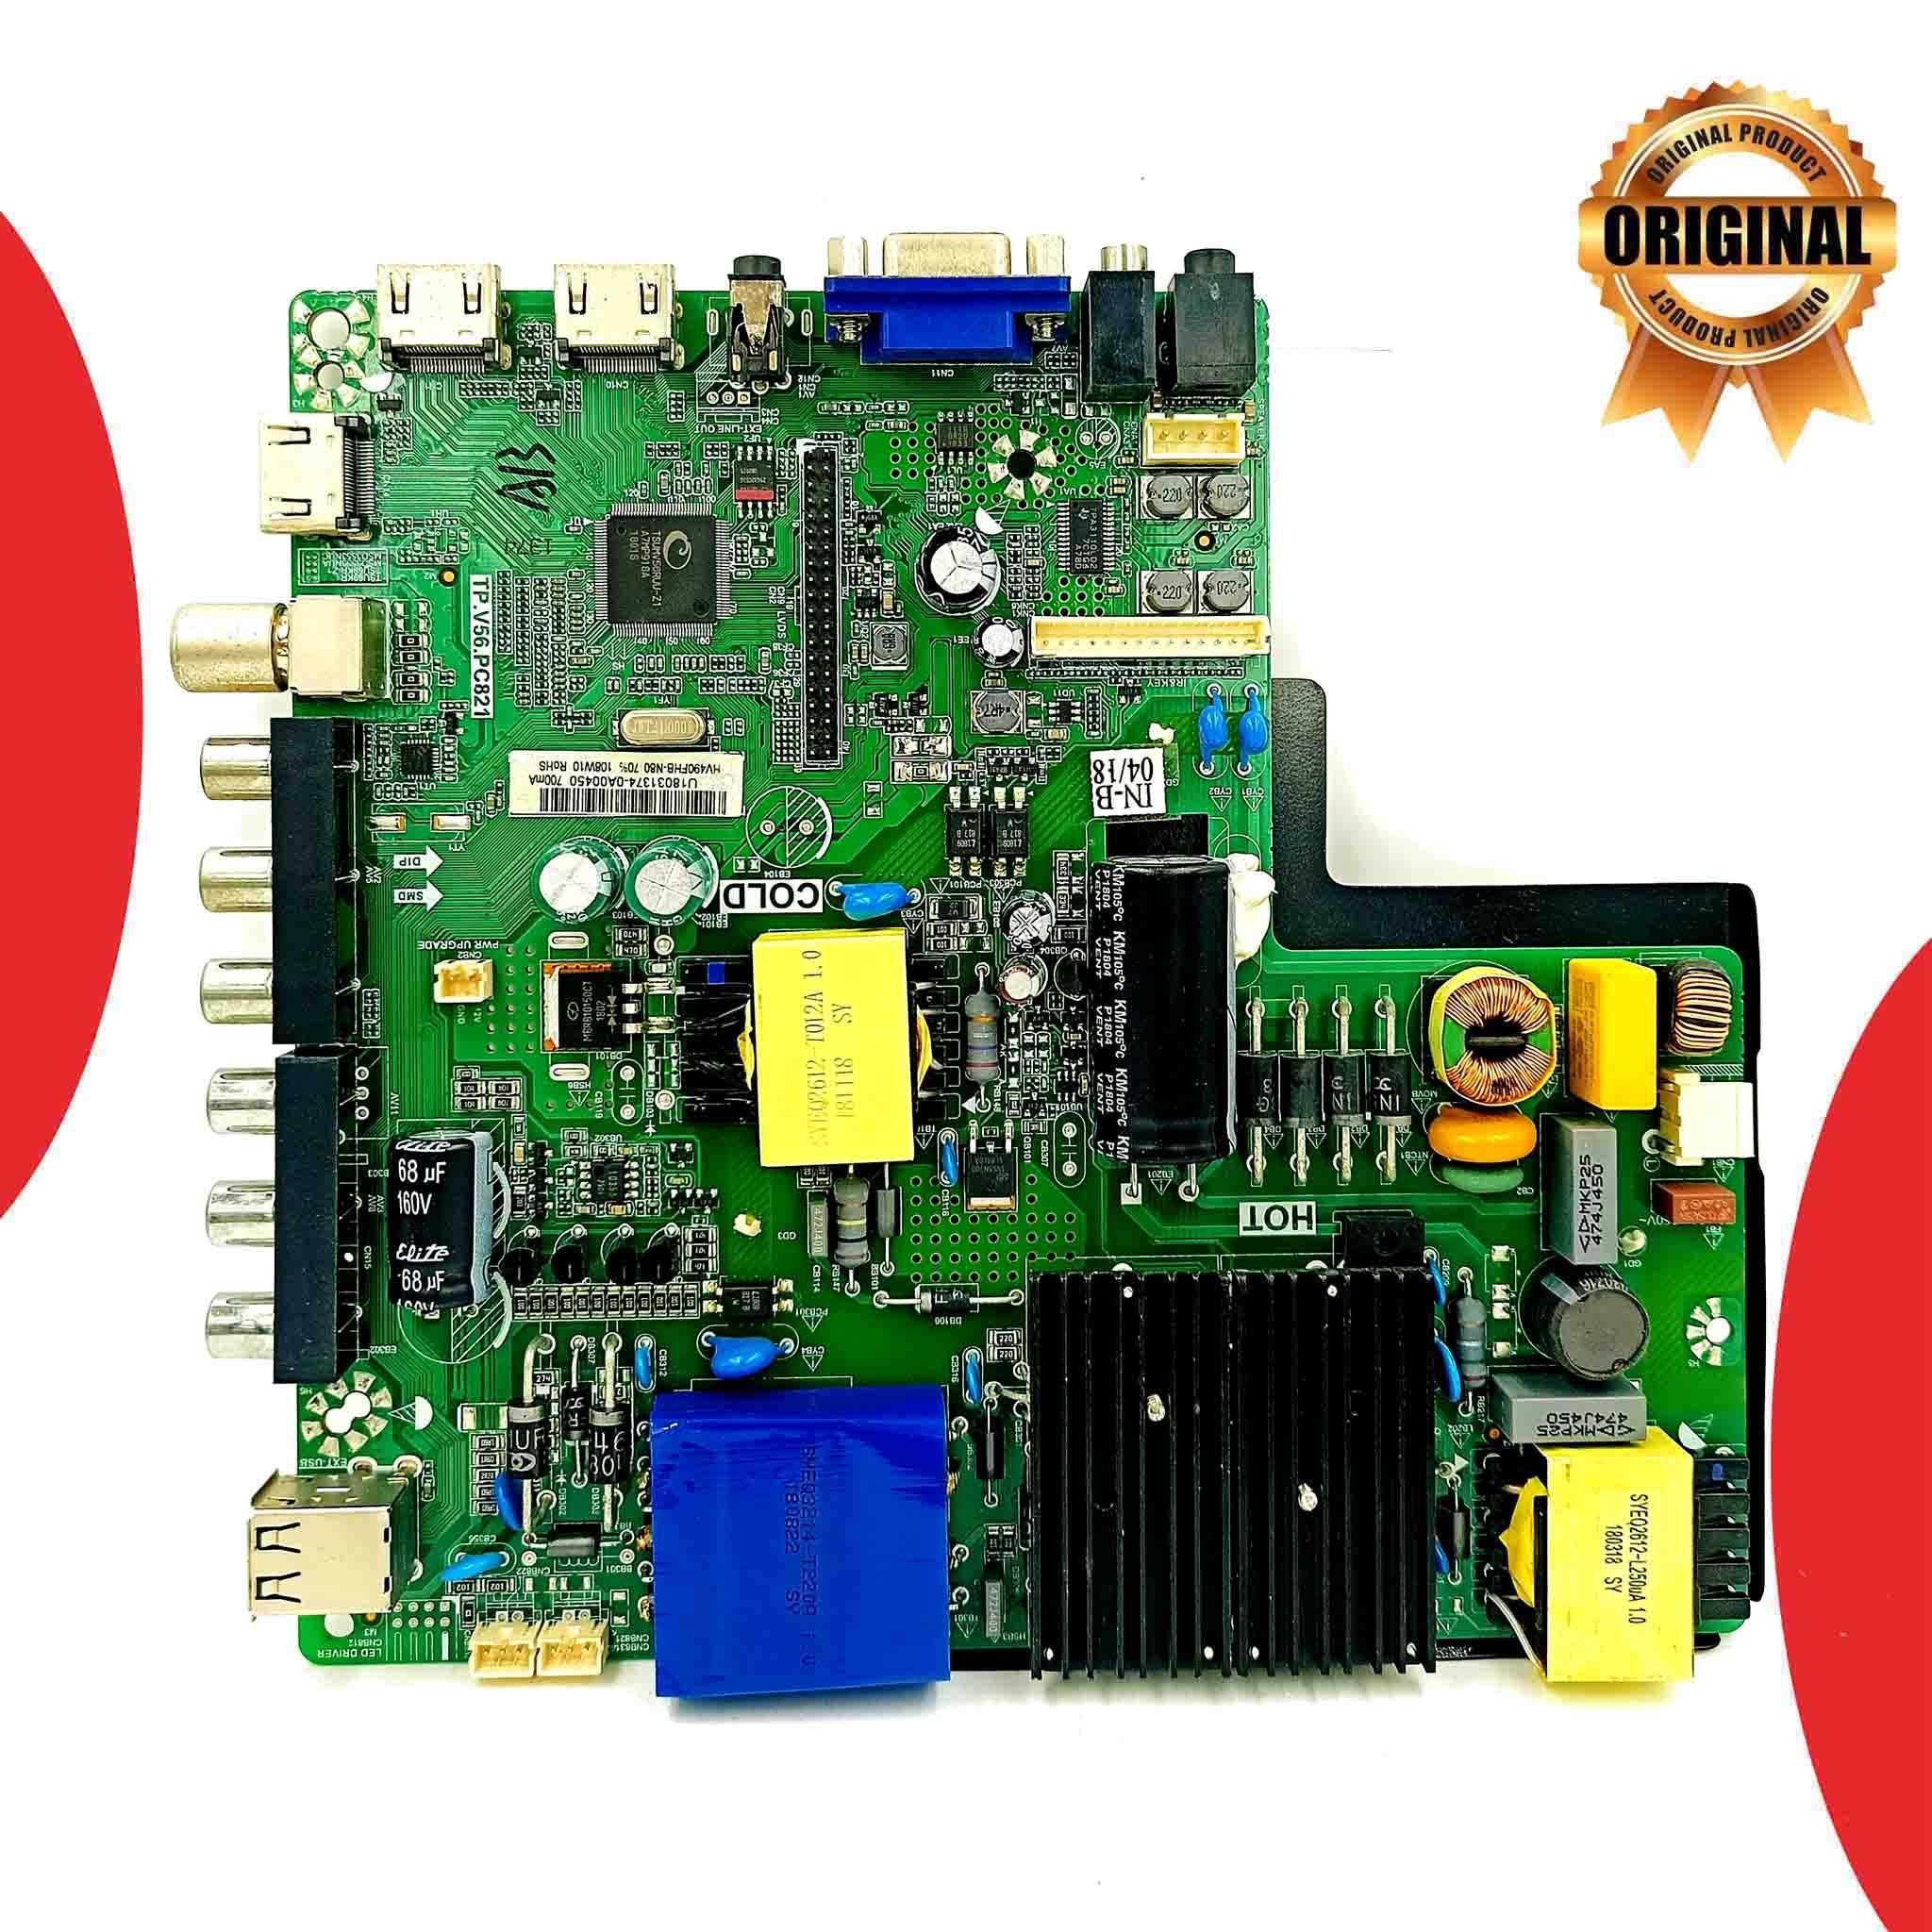 Intex 50 inch LED TV Motherboard for Model LED5012FHD - Great Bharat Electronics